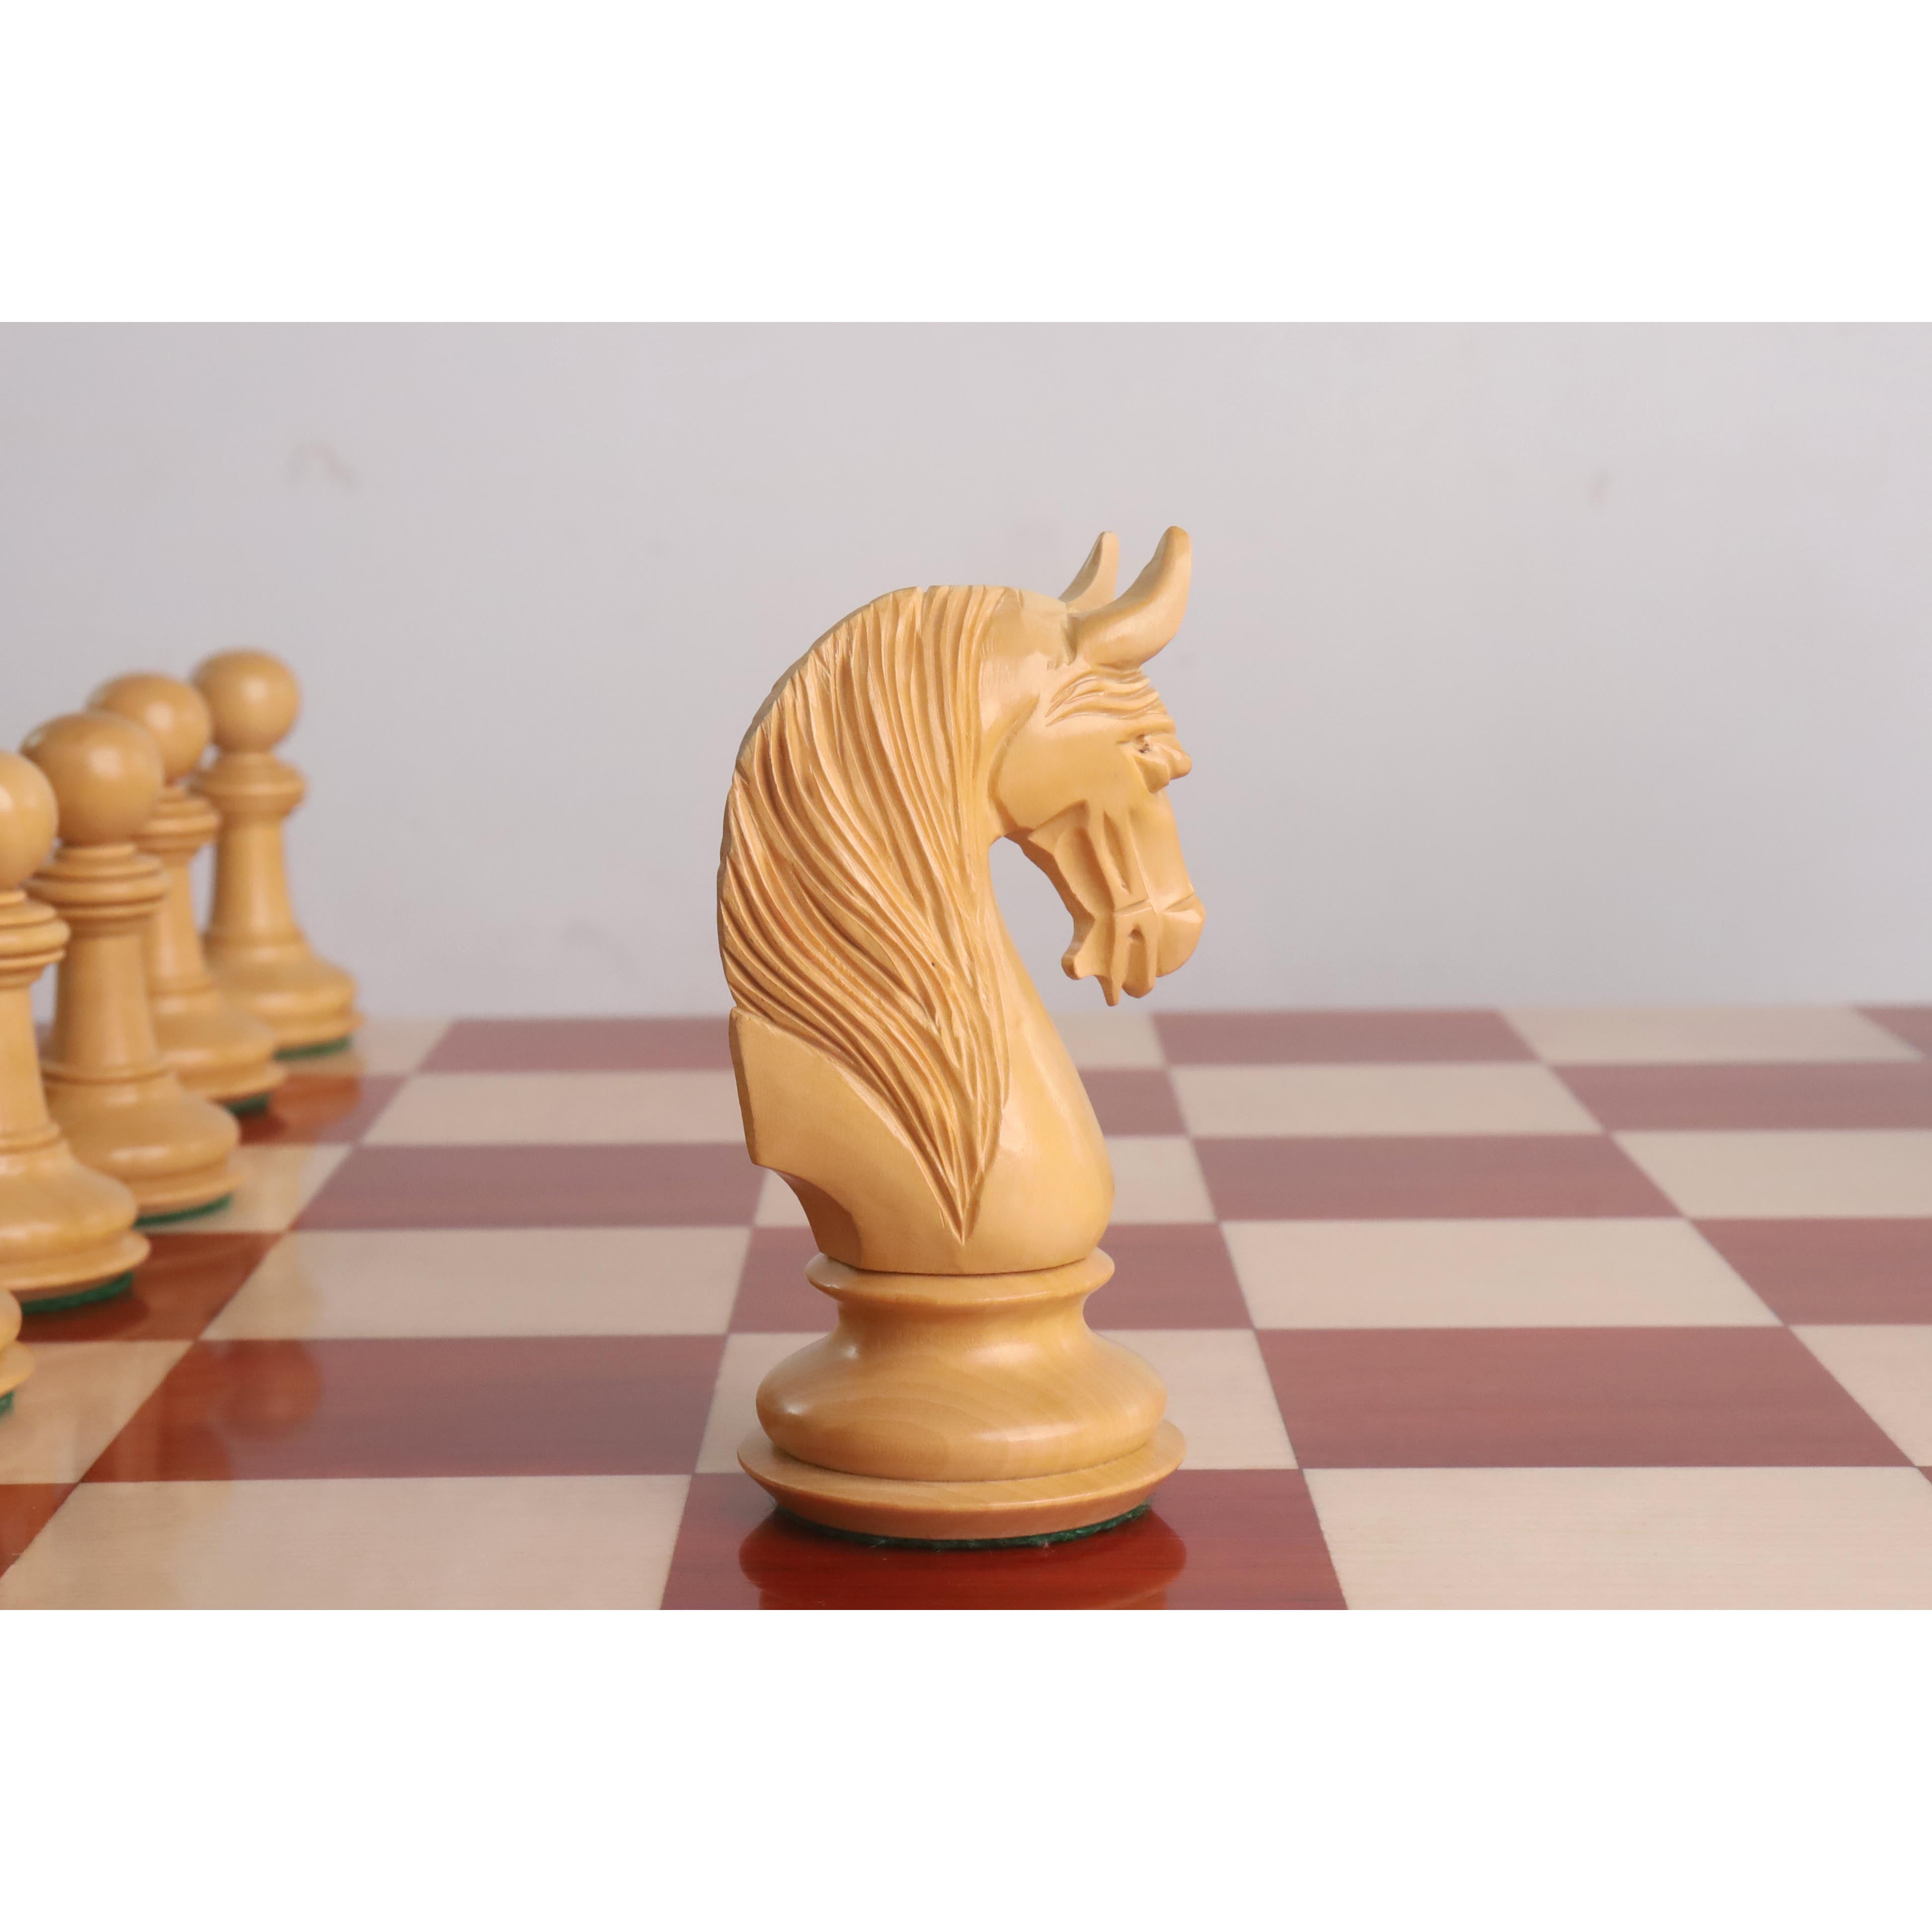 4.6" Bath Luxury Staunton Chess Set- Chess Pieces Only - Bud Rosewood - Triple Weight